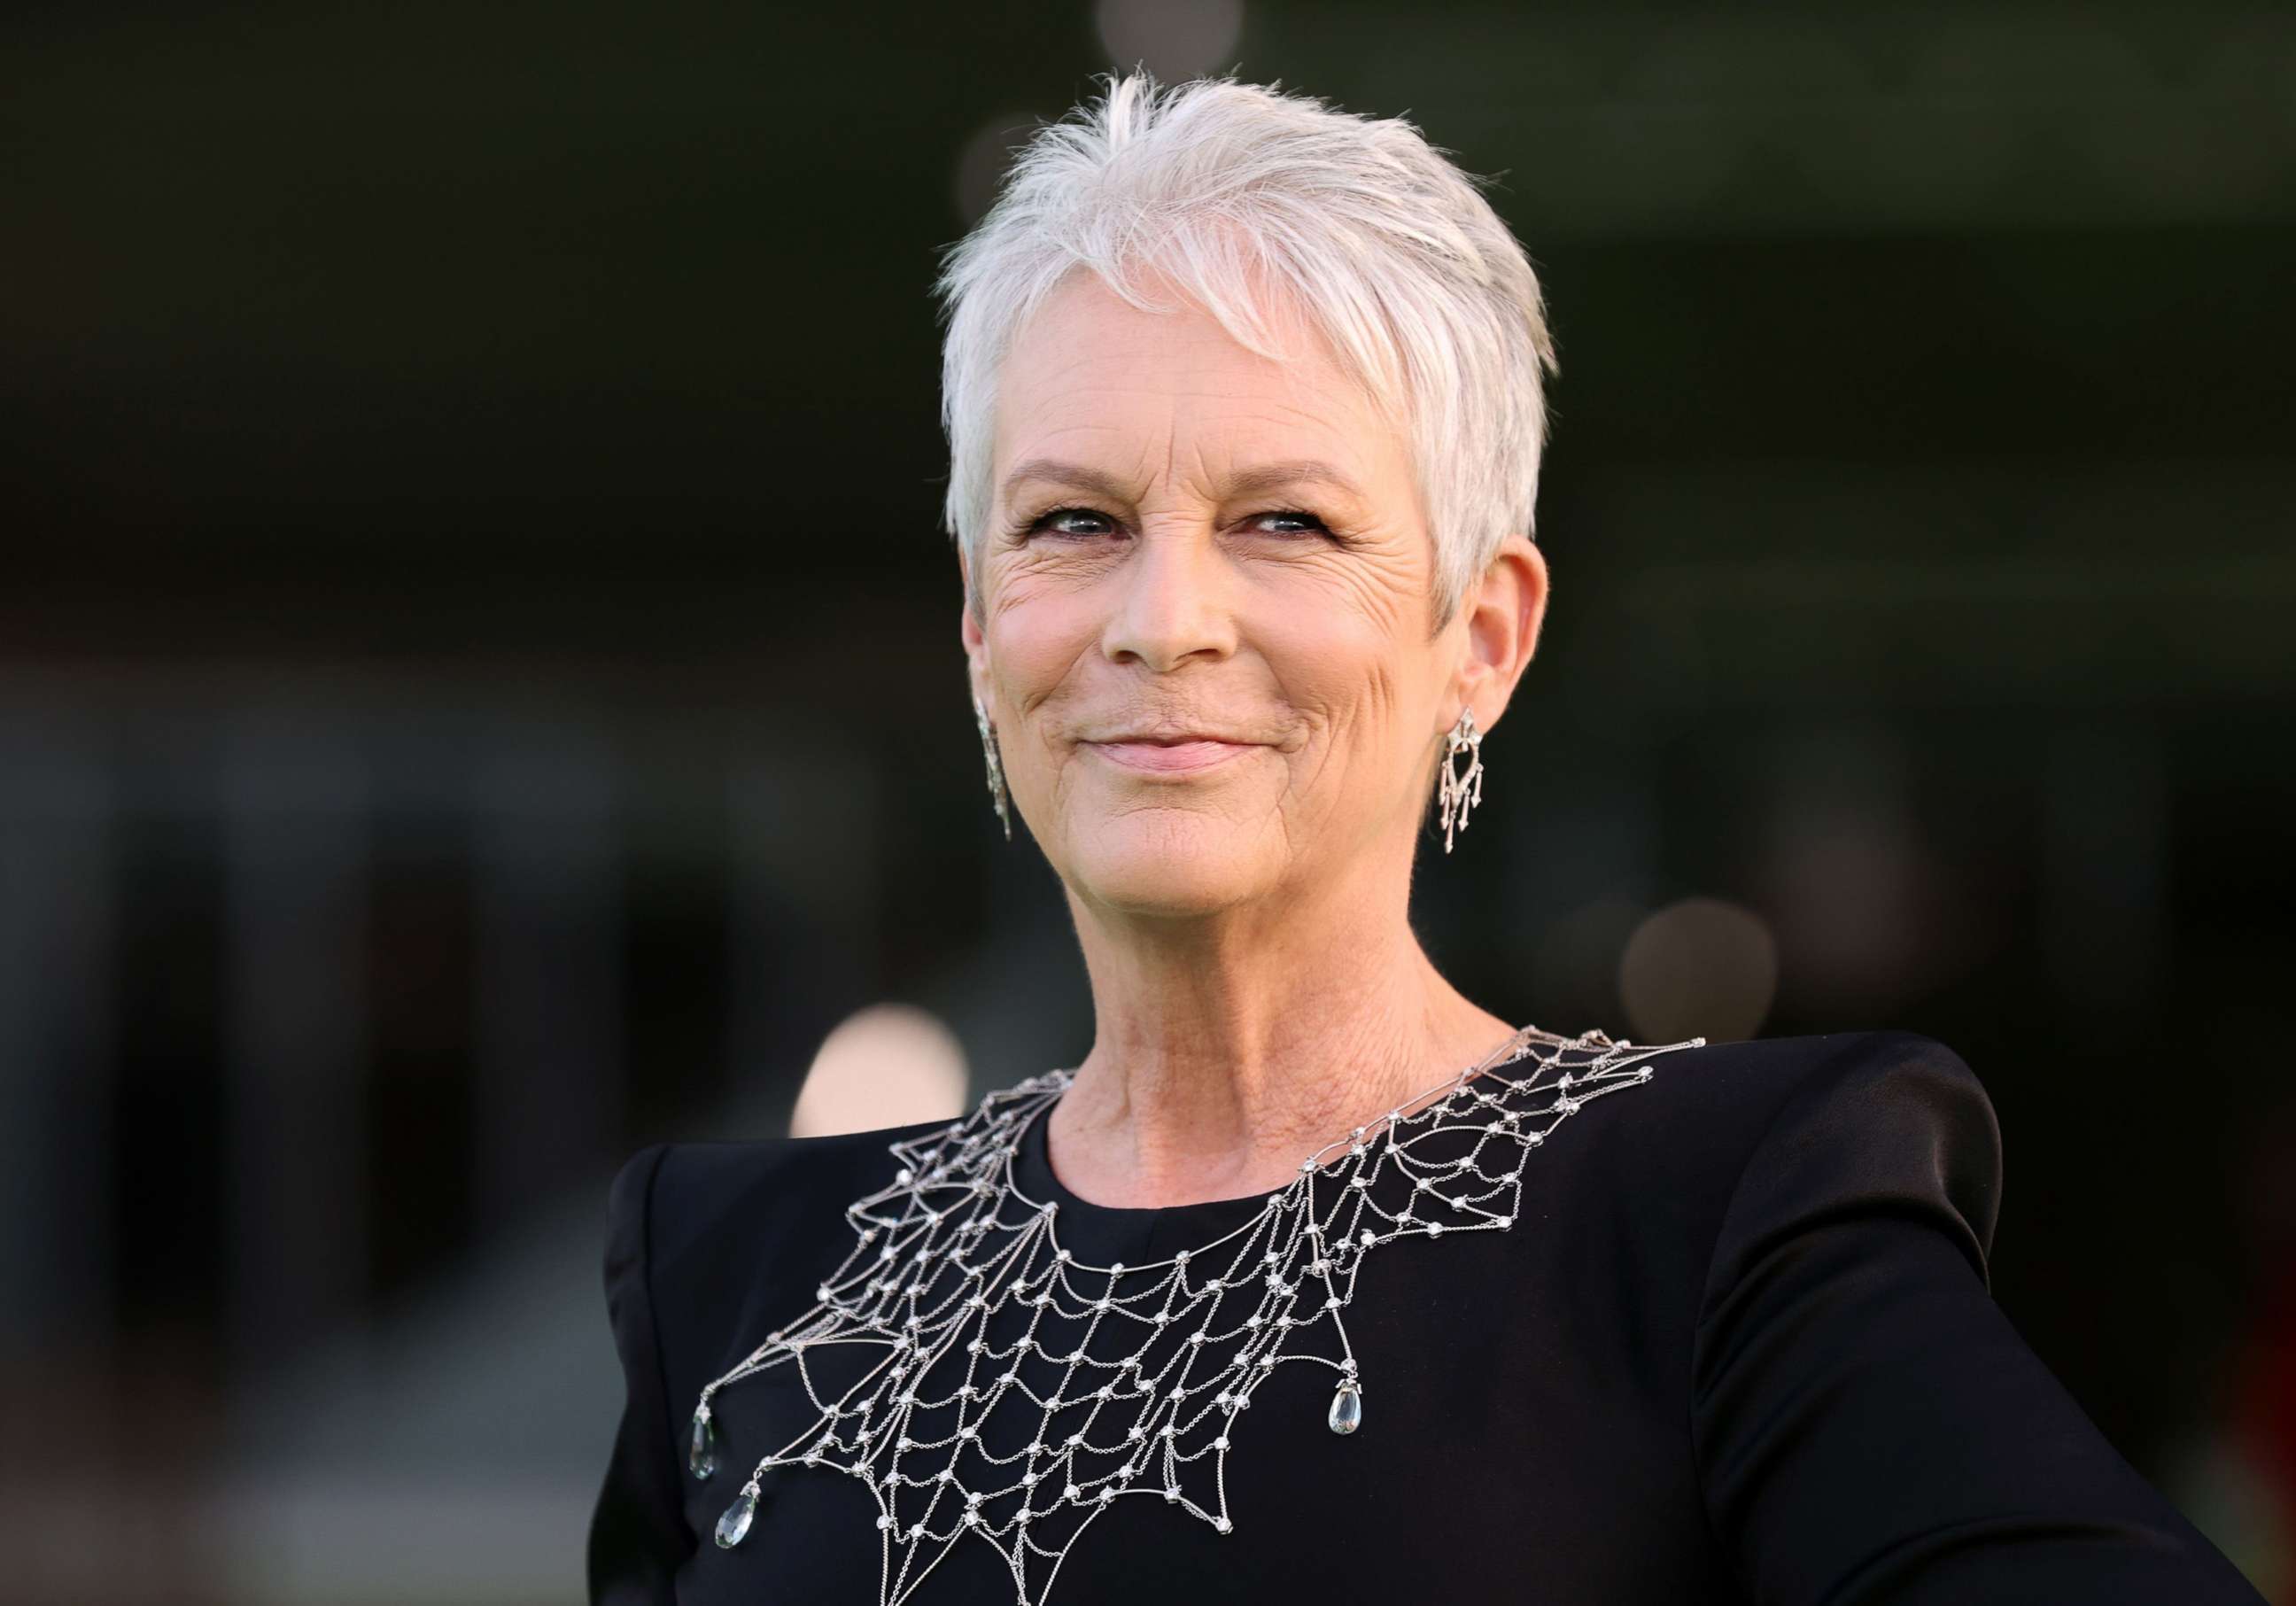 PHOTO: Jamie Lee Curtis attends The Academy Museum of Motion Pictures Opening Gala at The Academy Museum of Motion Pictures, Sept. 25, 2021, in Los Angeles.